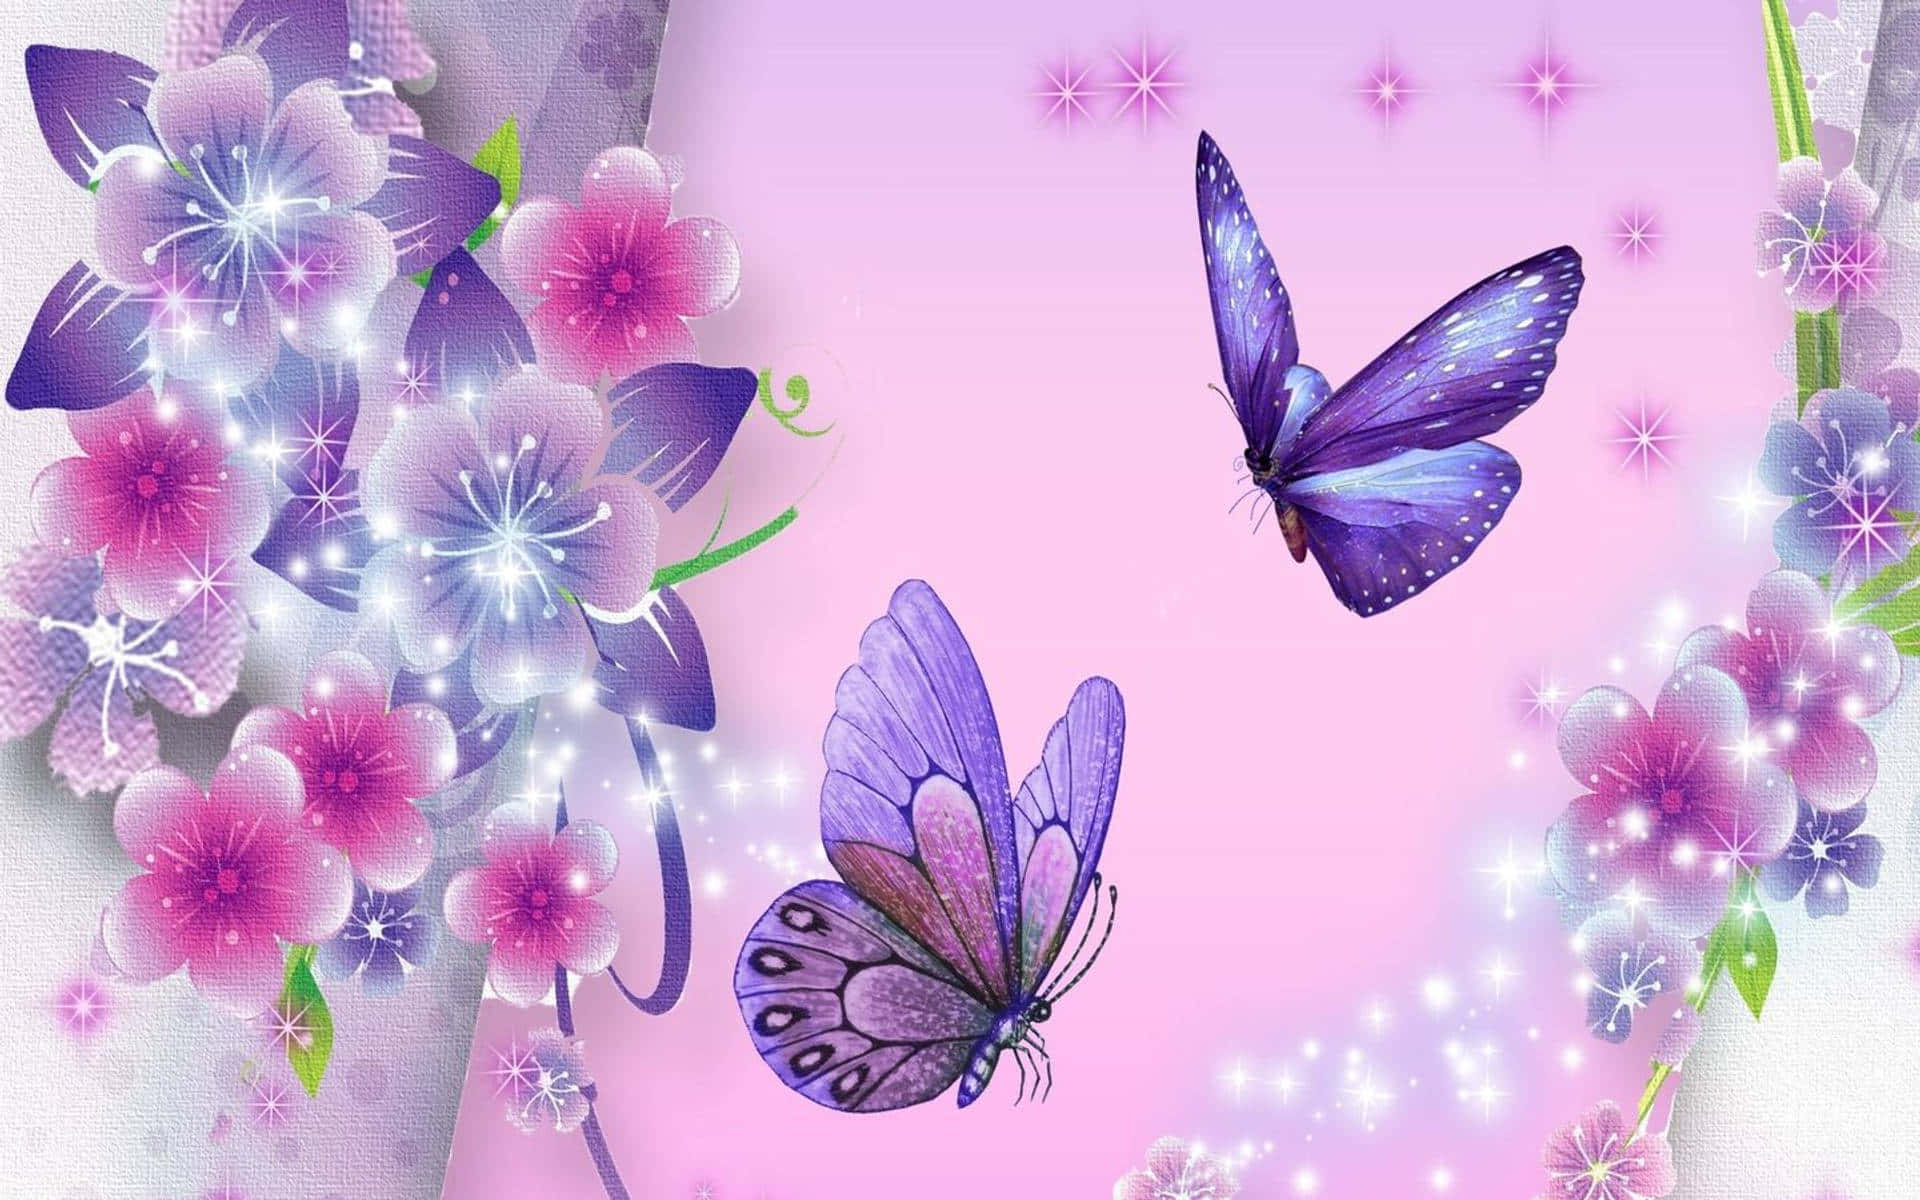 Blue Butterfly Laptop Wallpapers HD Blue Butterfly 1366x768 Backgrounds  Free Images Download